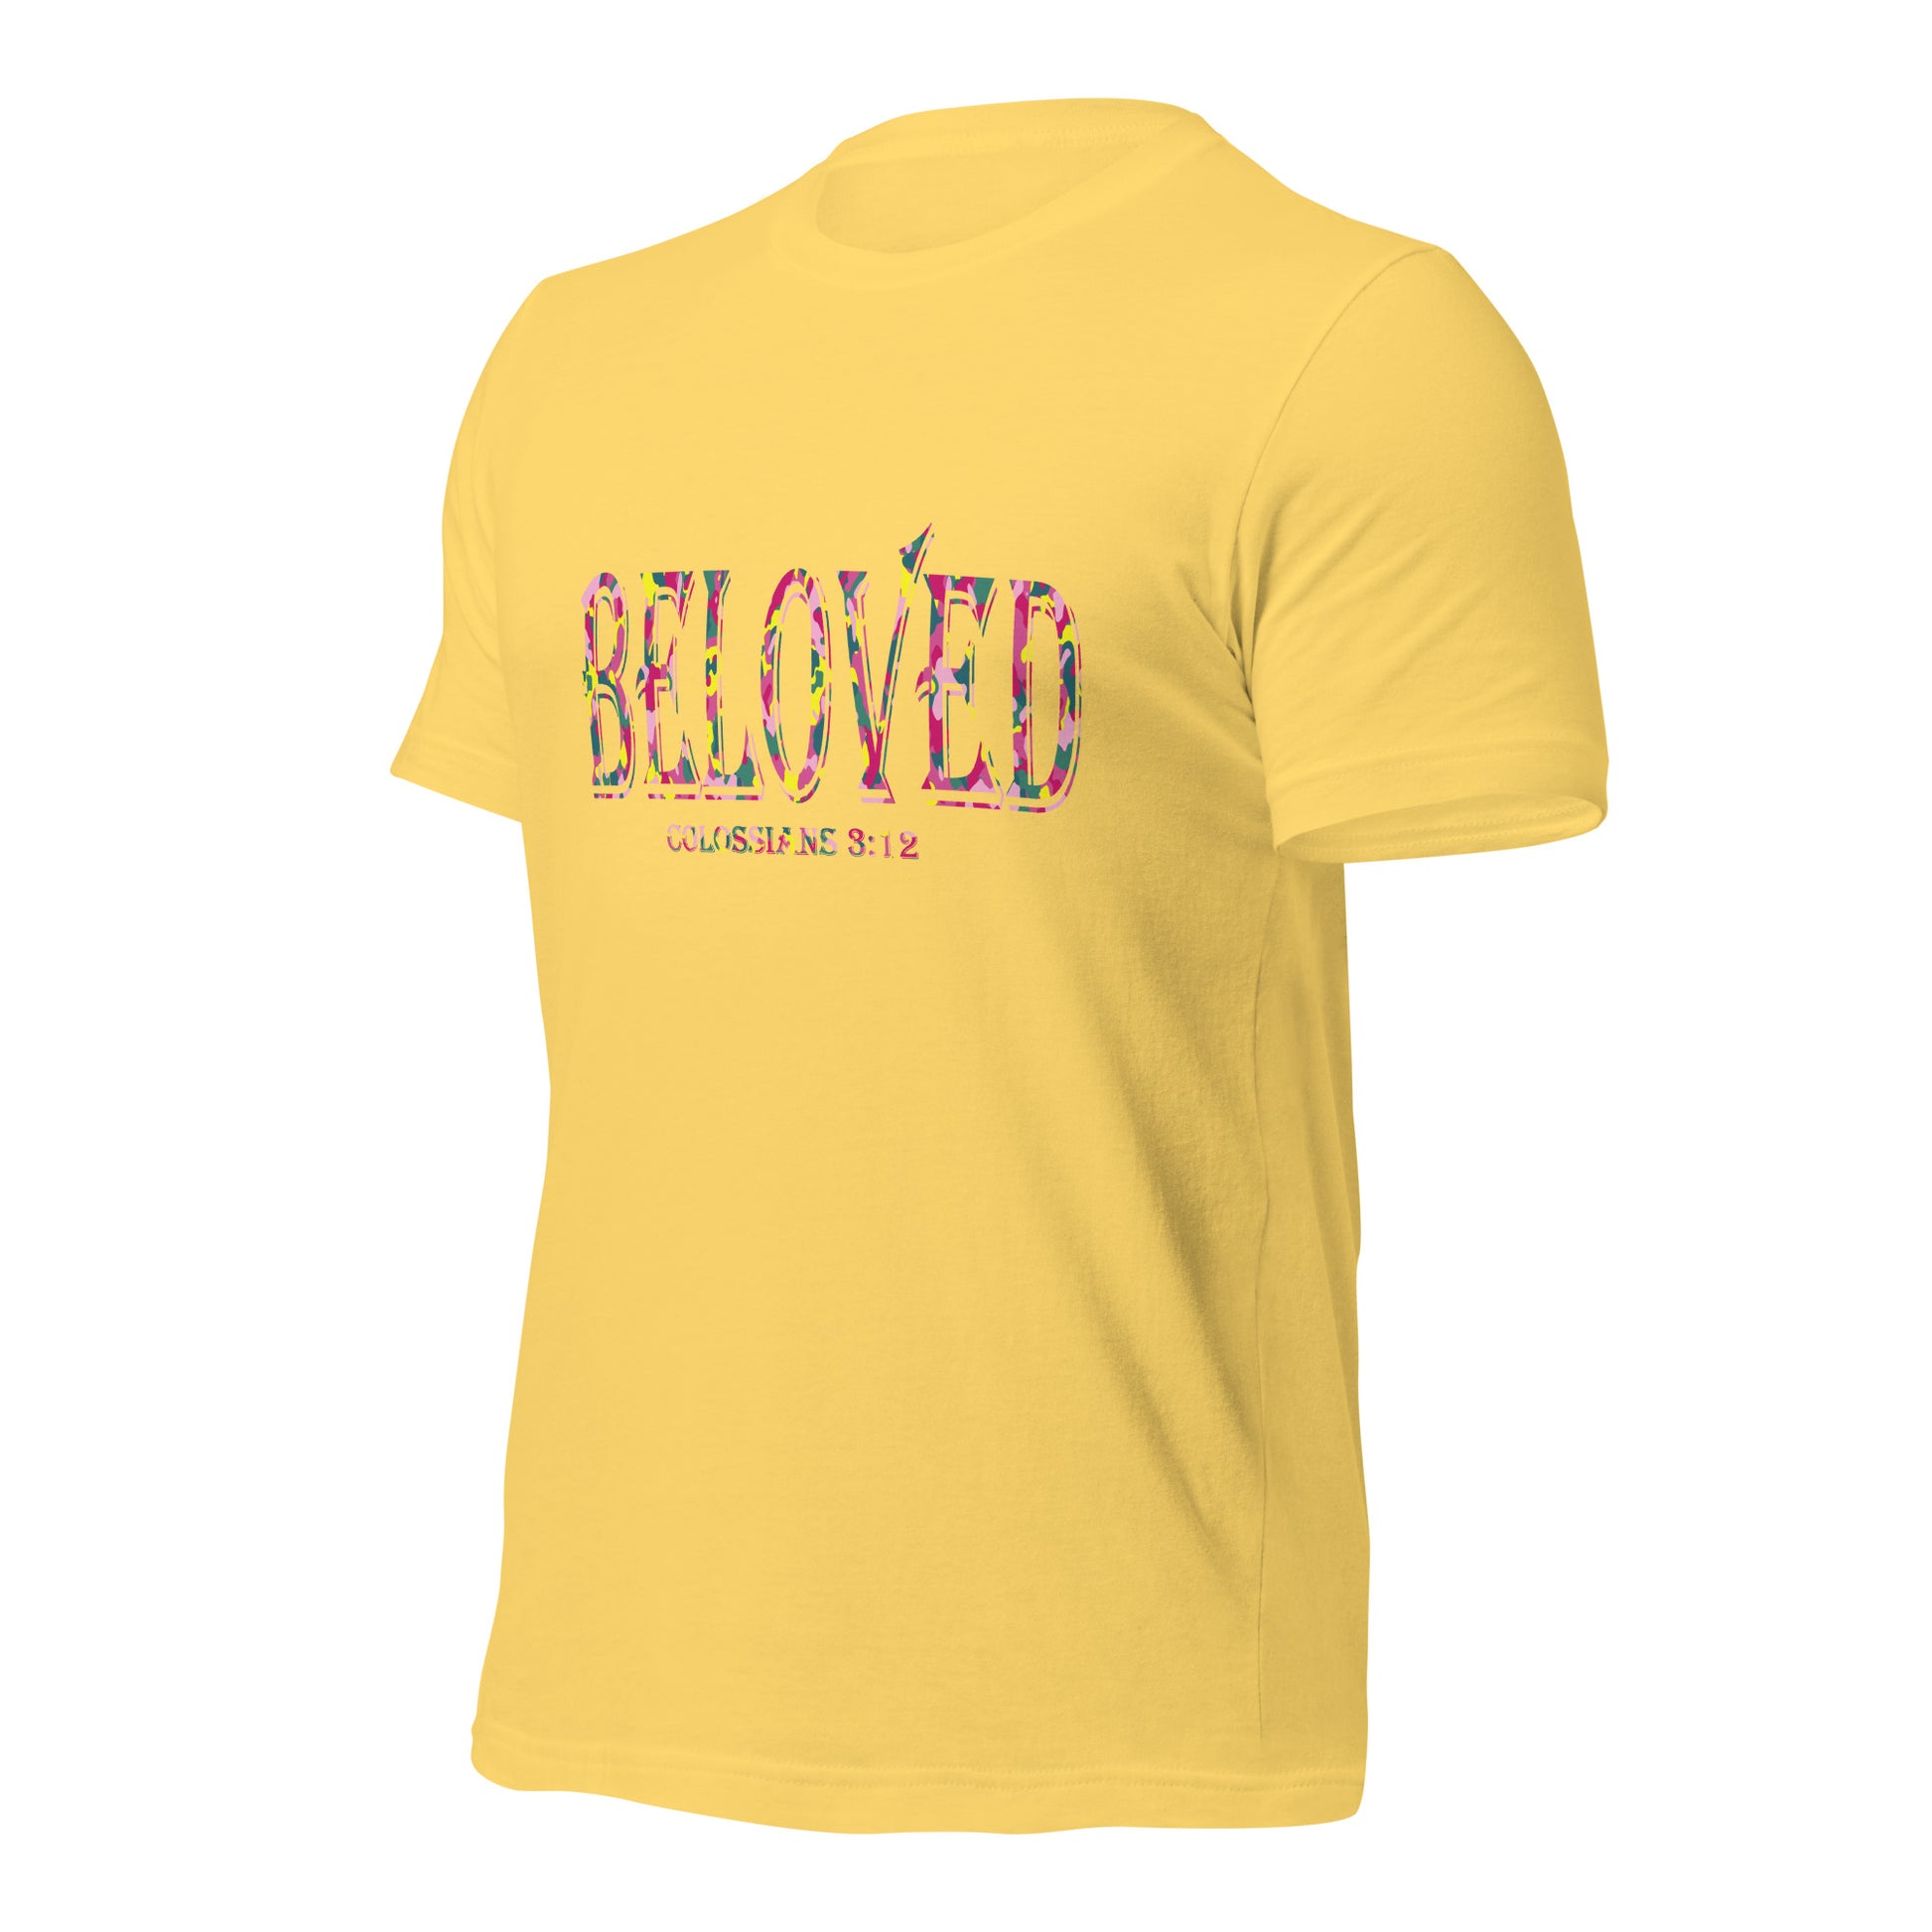 Colossians 3:12 Beloved T-shirt yellow angled view